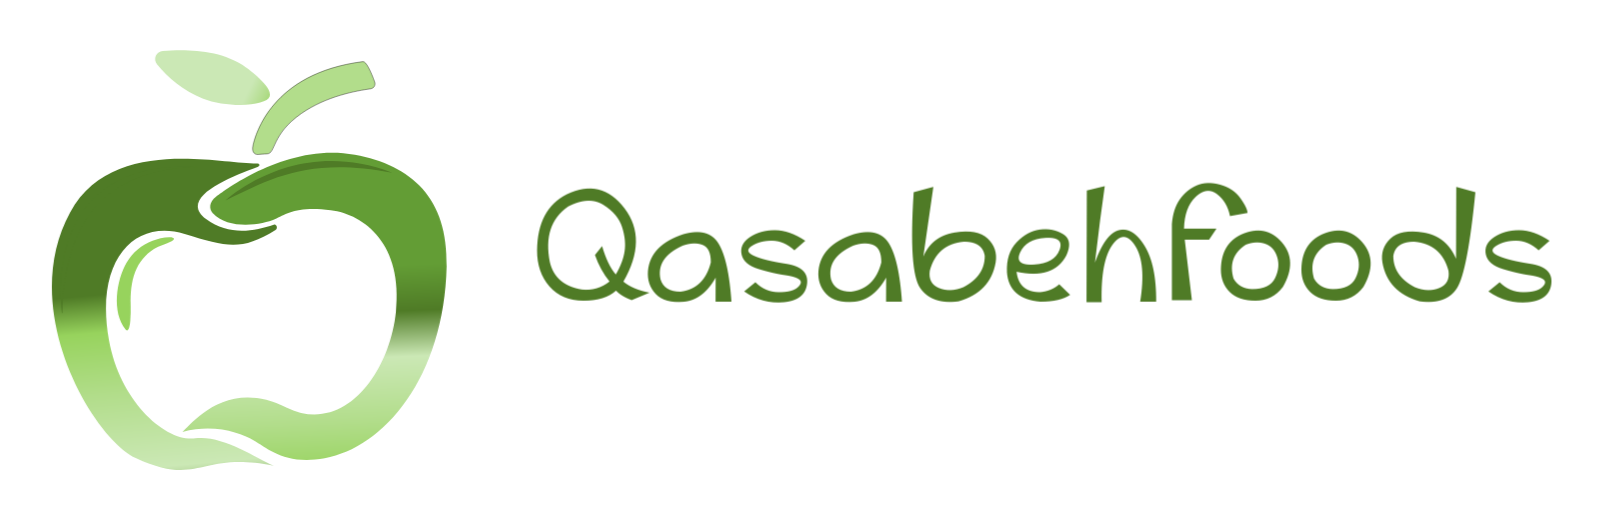 WE ARE QASABEH FOODS